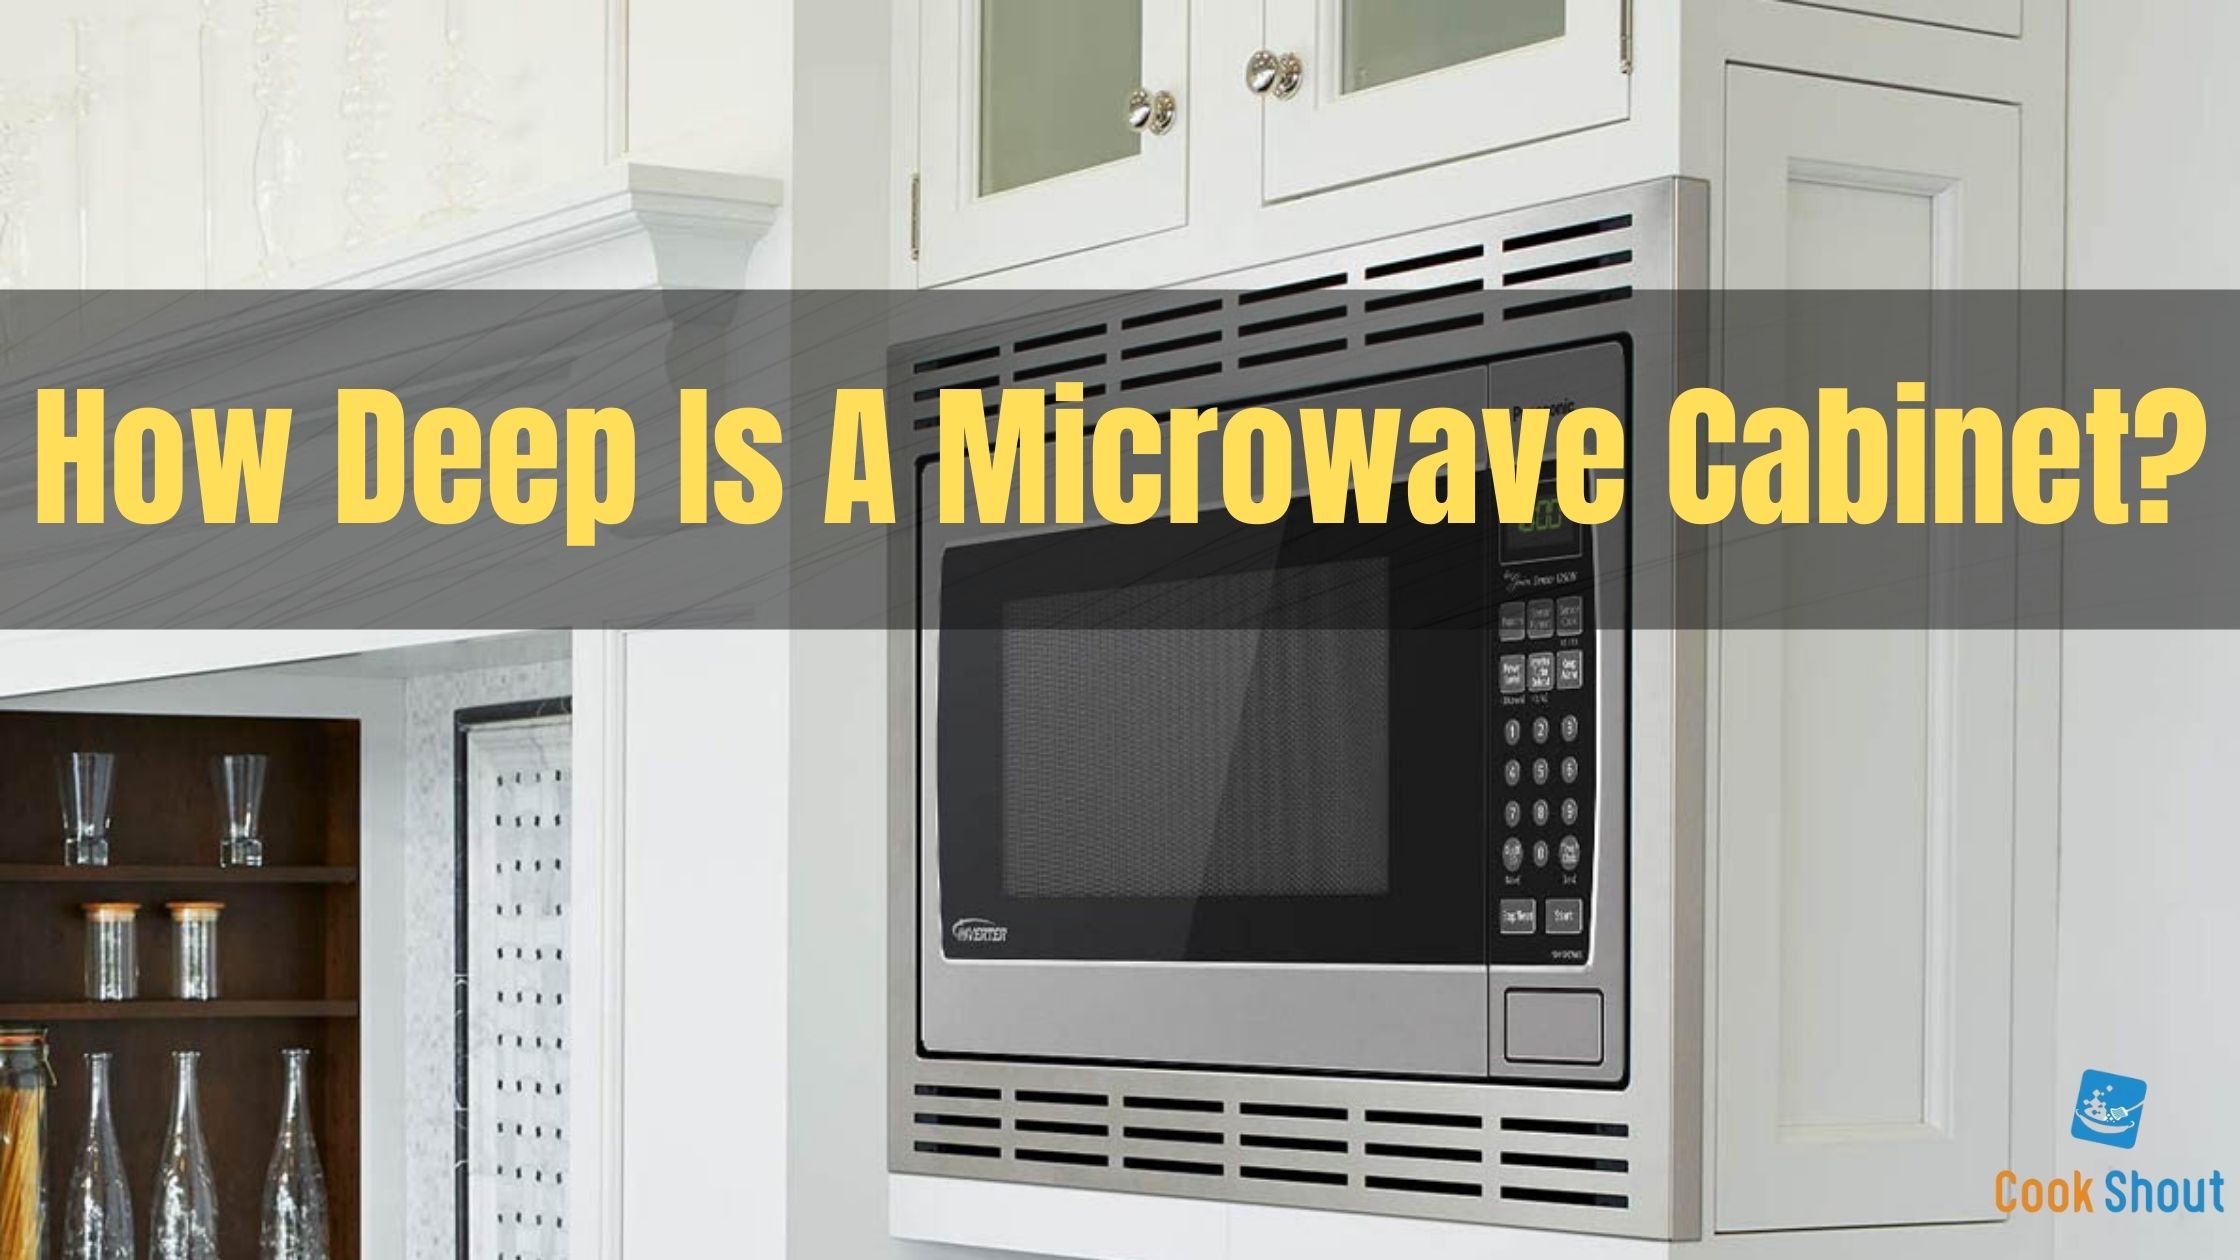 How Deep Is A Microwave Cabinet?